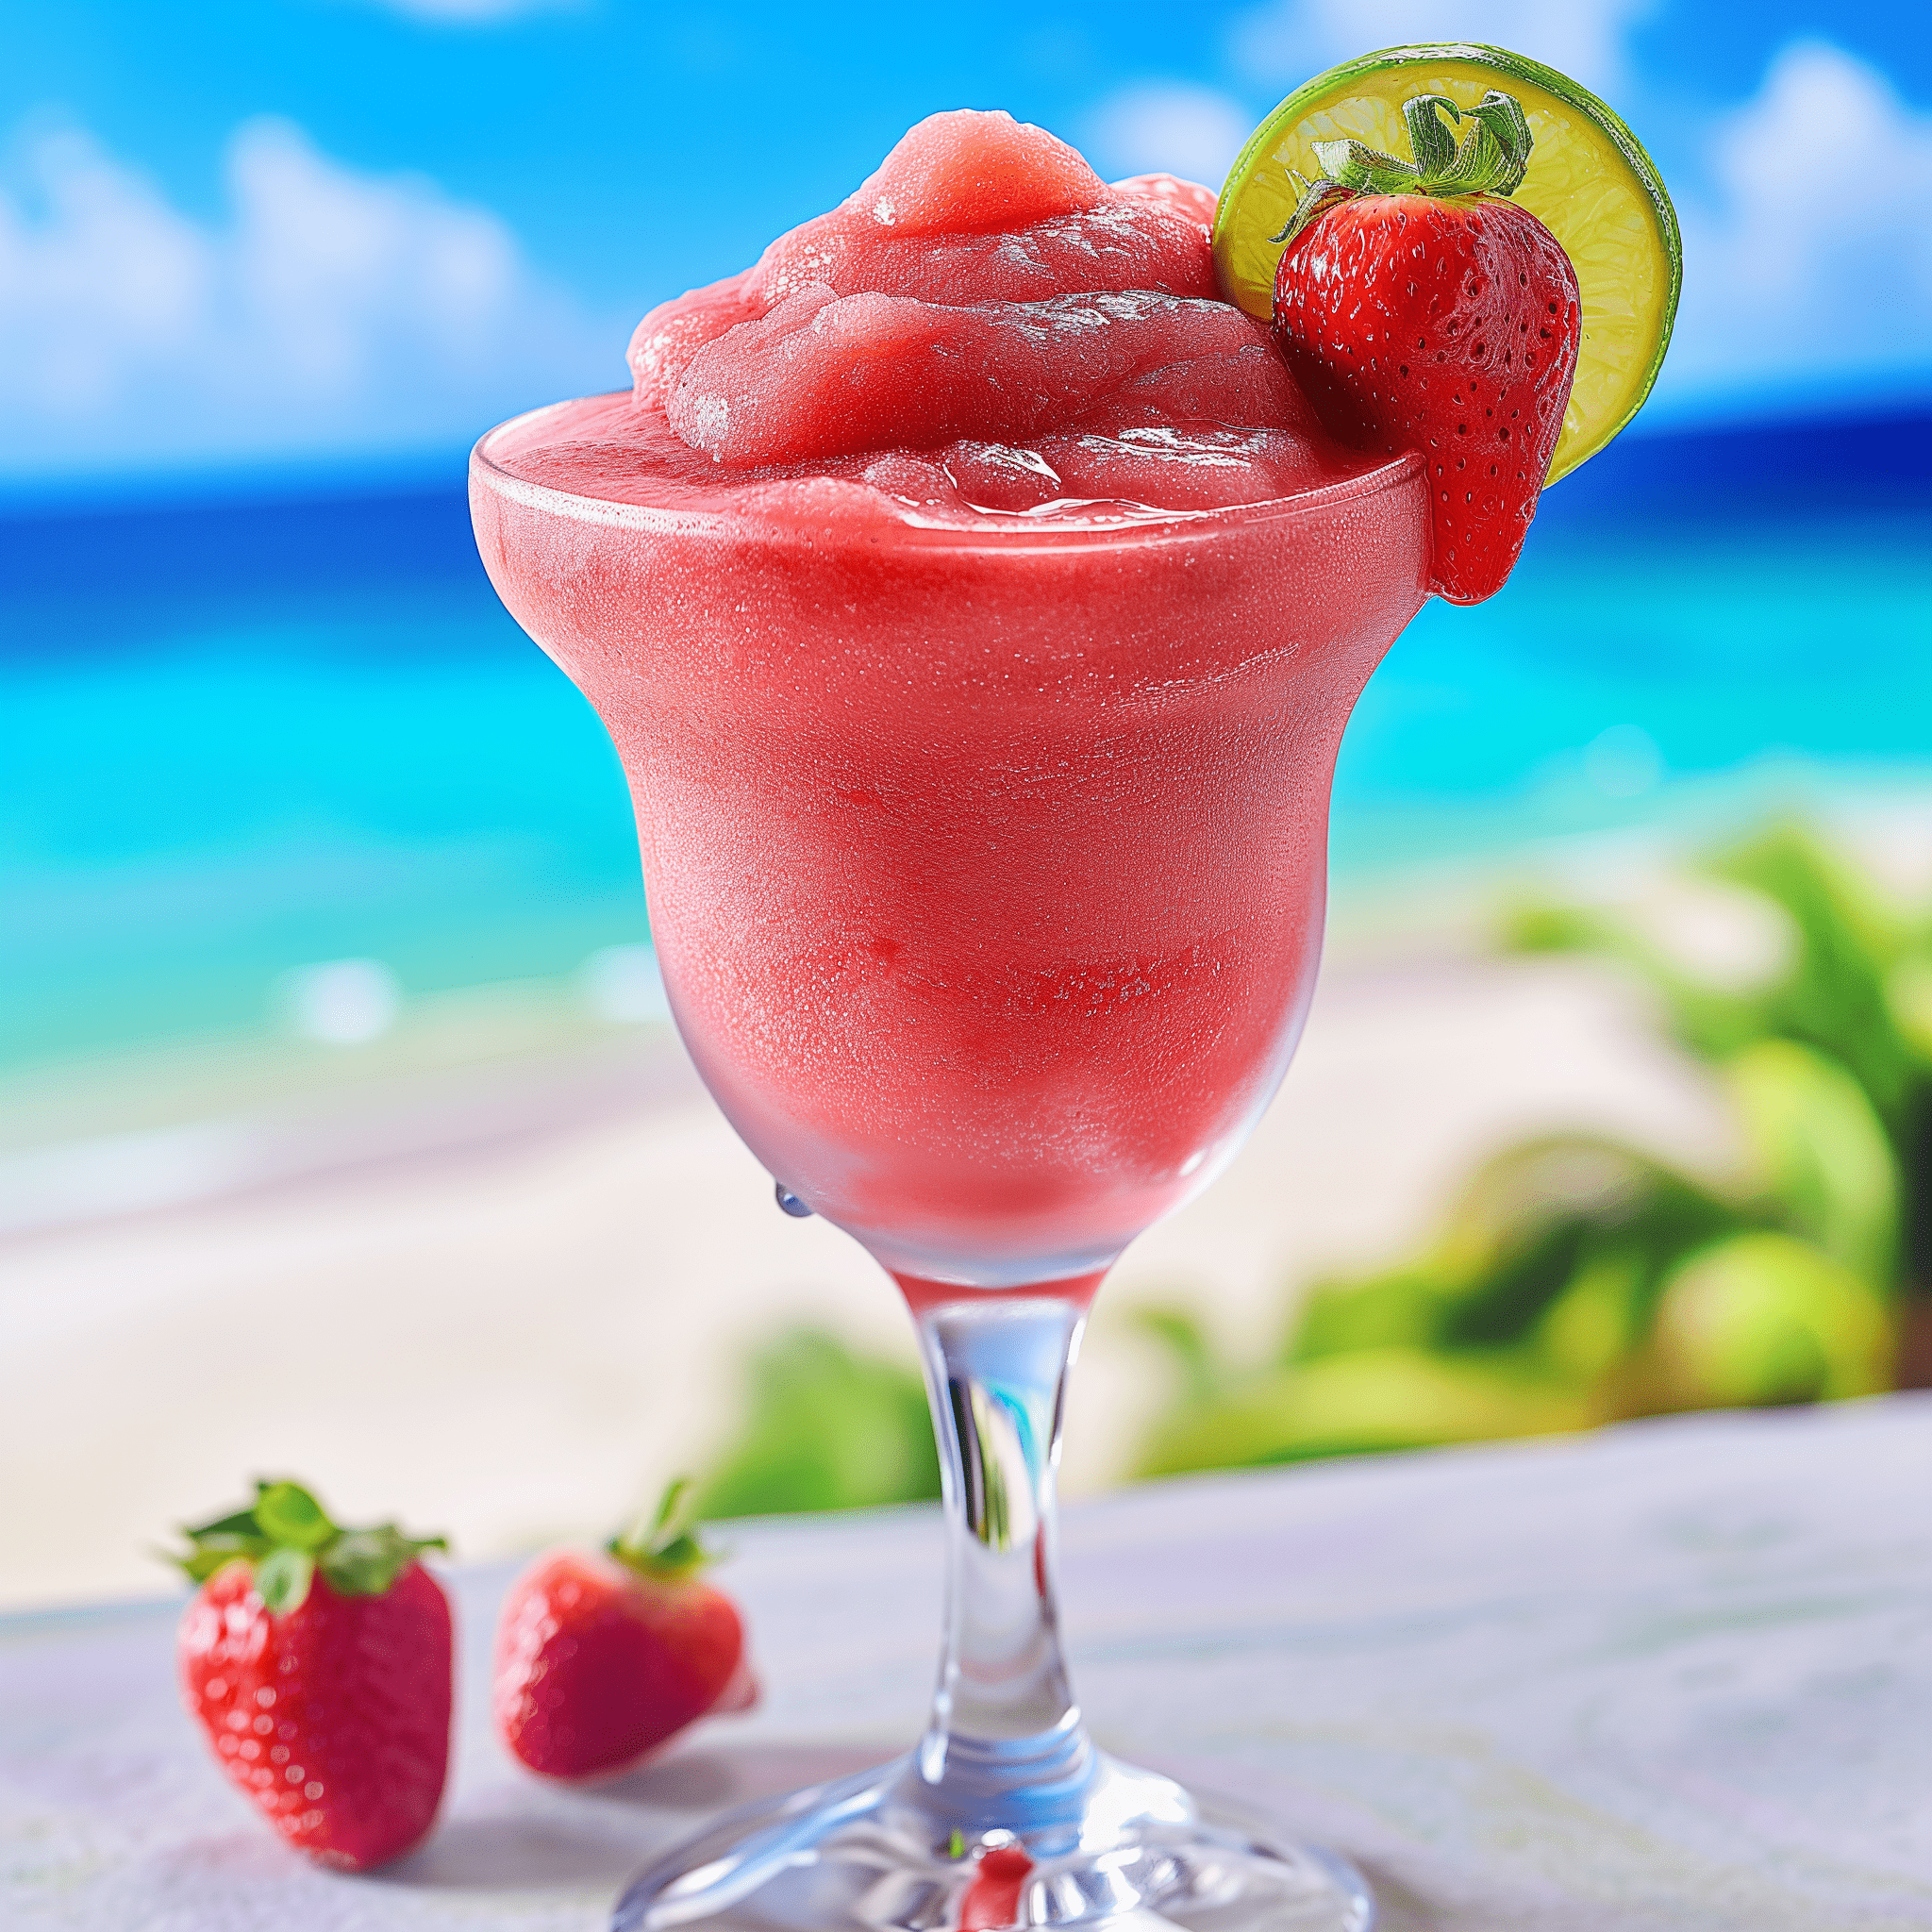 Daiquiri Mocktail Recipe - The Daiquiri Mocktail has a refreshing, tangy taste with a sweet undertone. It's light and crisp, making it a perfect drink for summer days or as a palate cleanser.